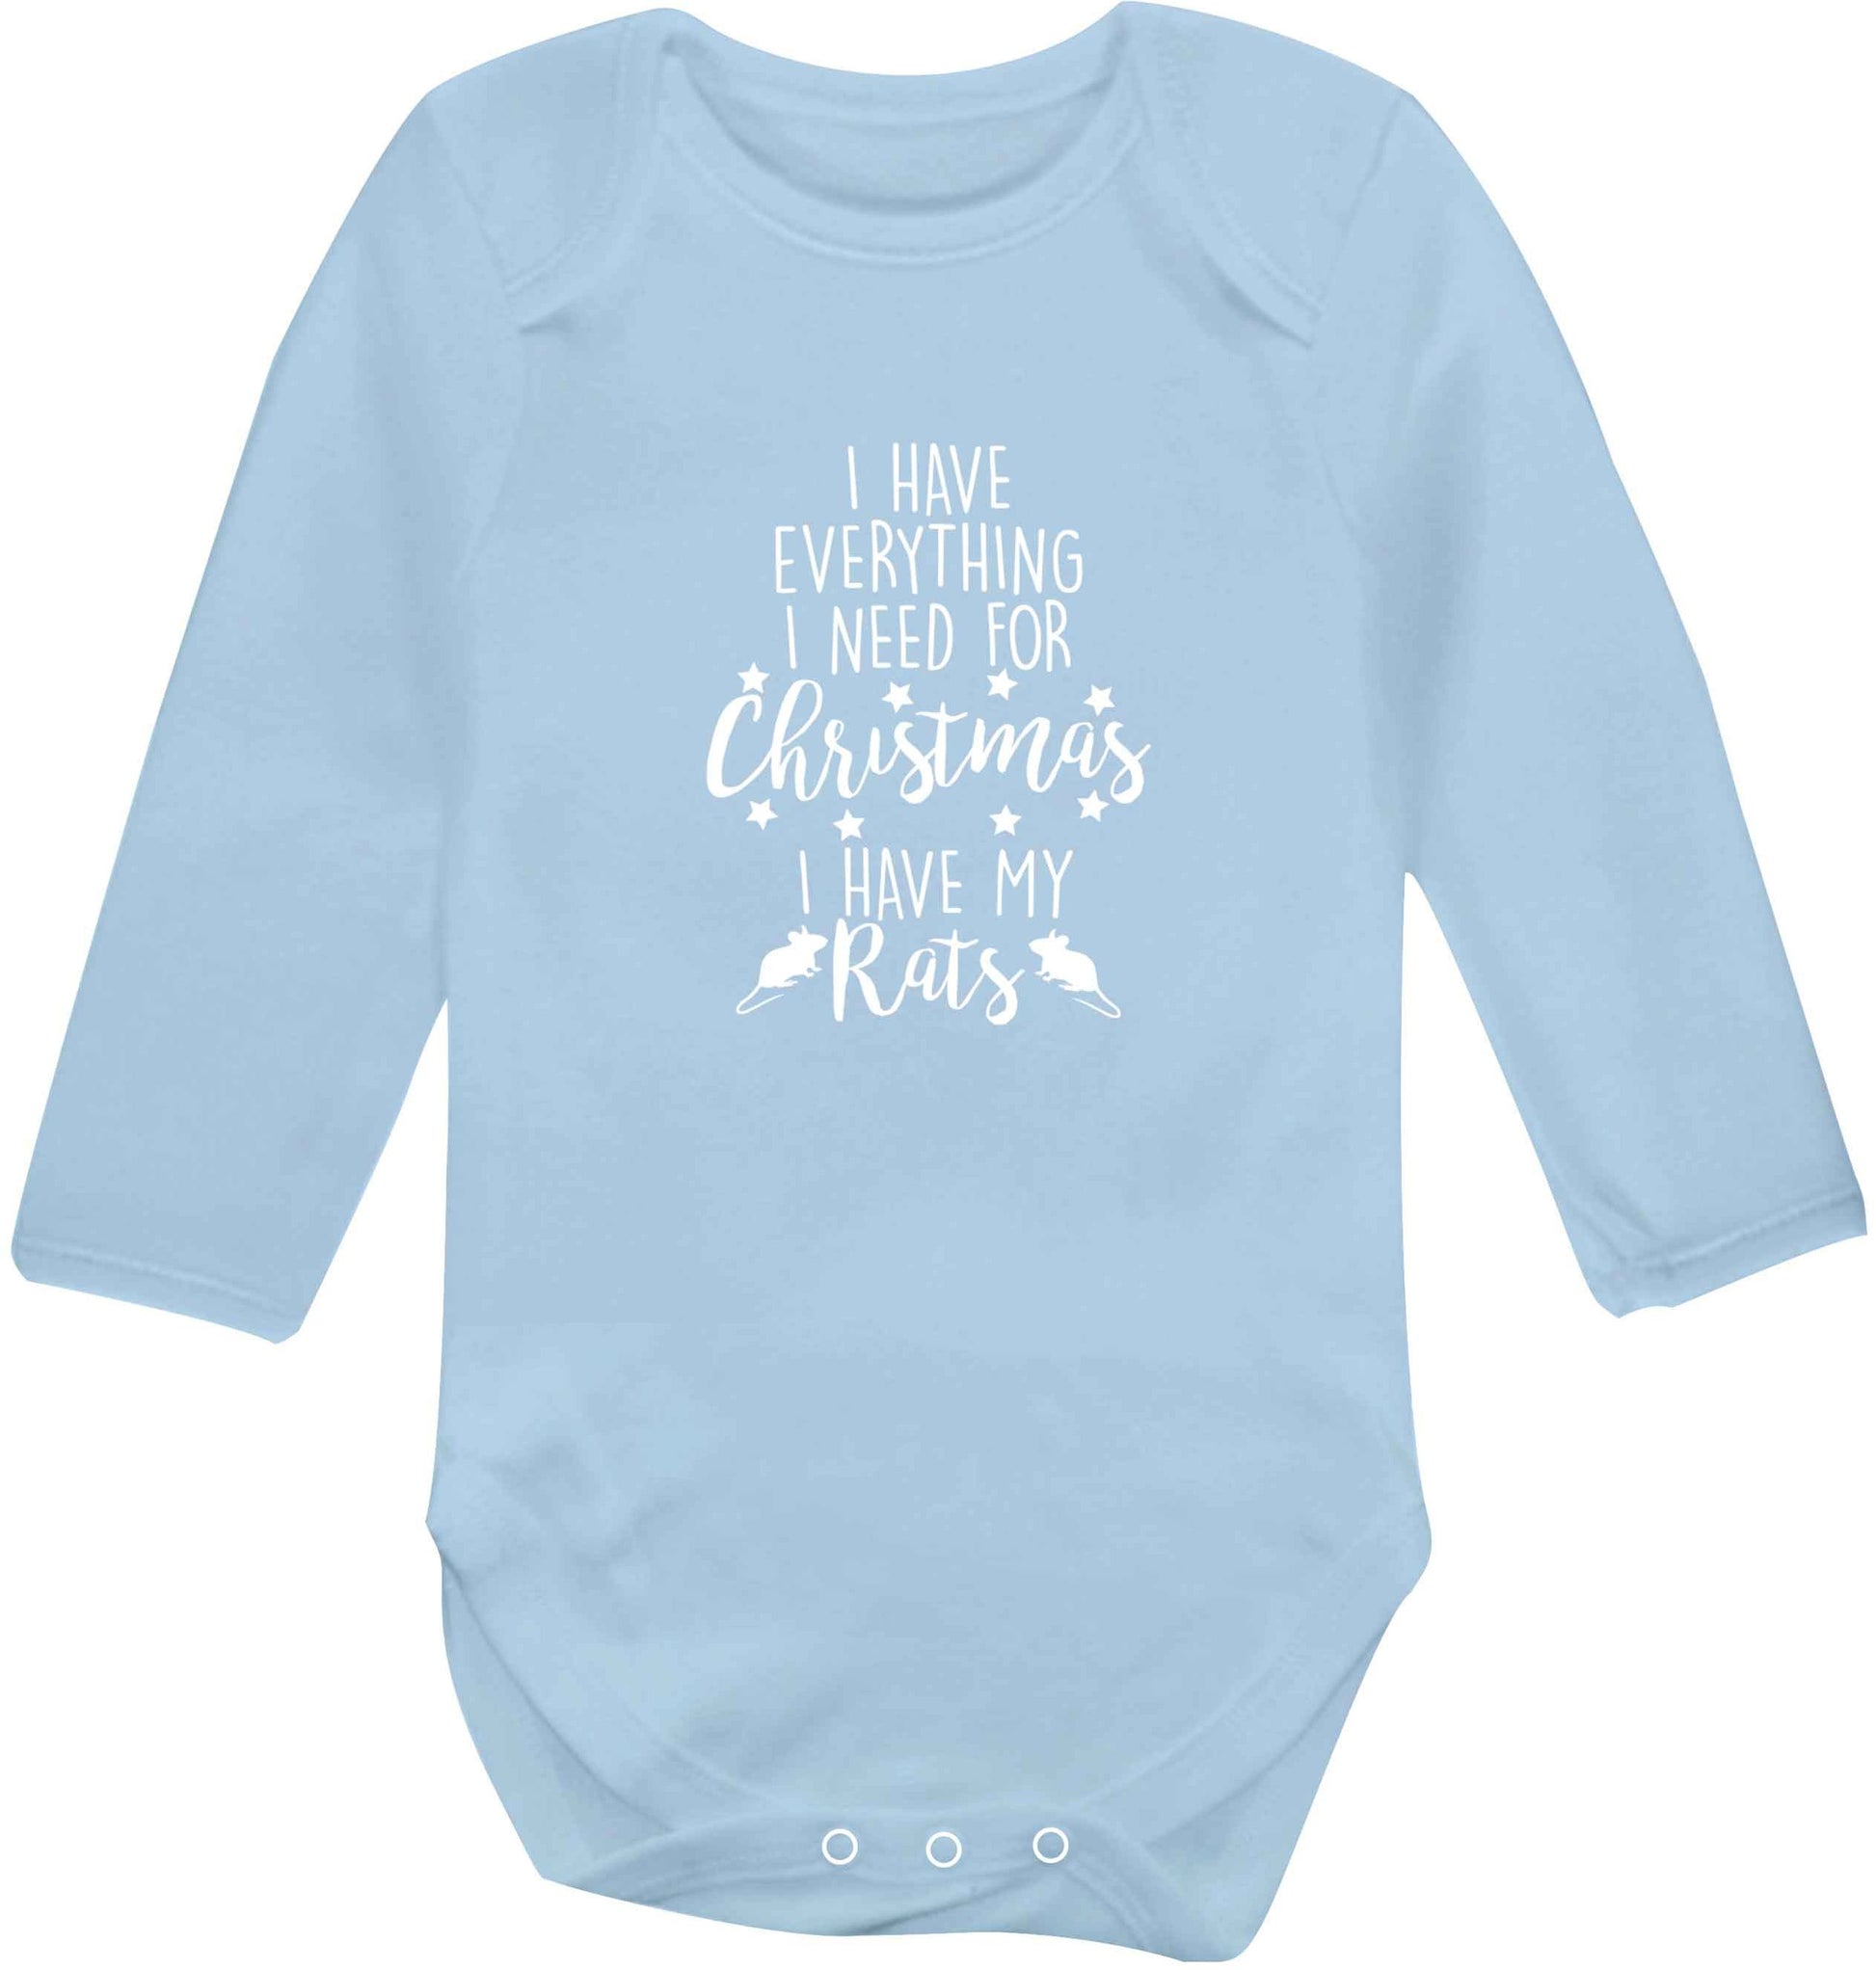 I have everything I need for Christmas I have my rats baby vest long sleeved pale blue 6-12 months